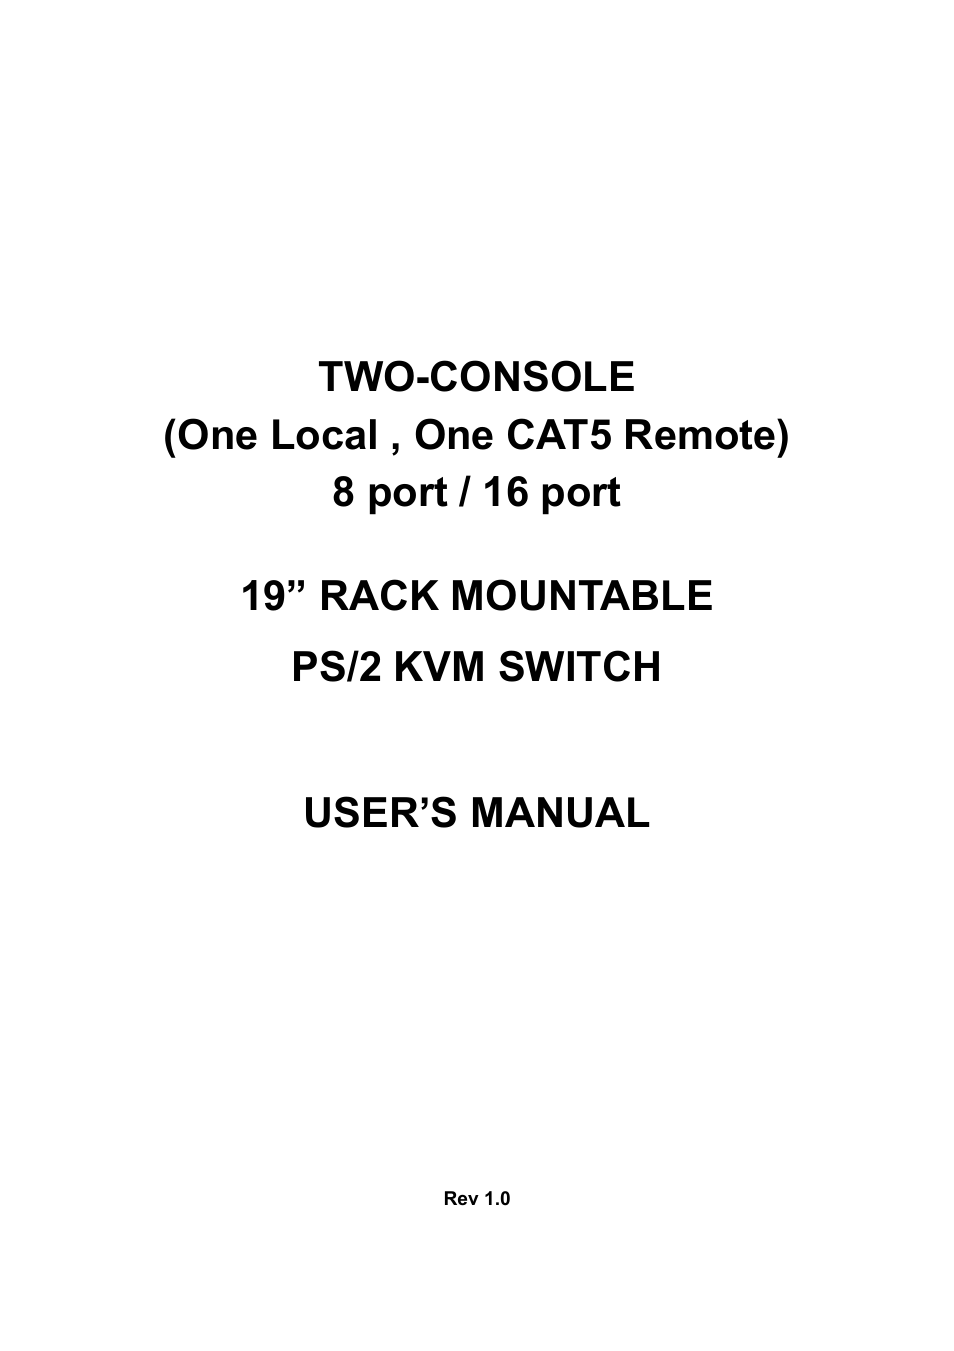 Two-console 8 port PS/2 KVM Switch